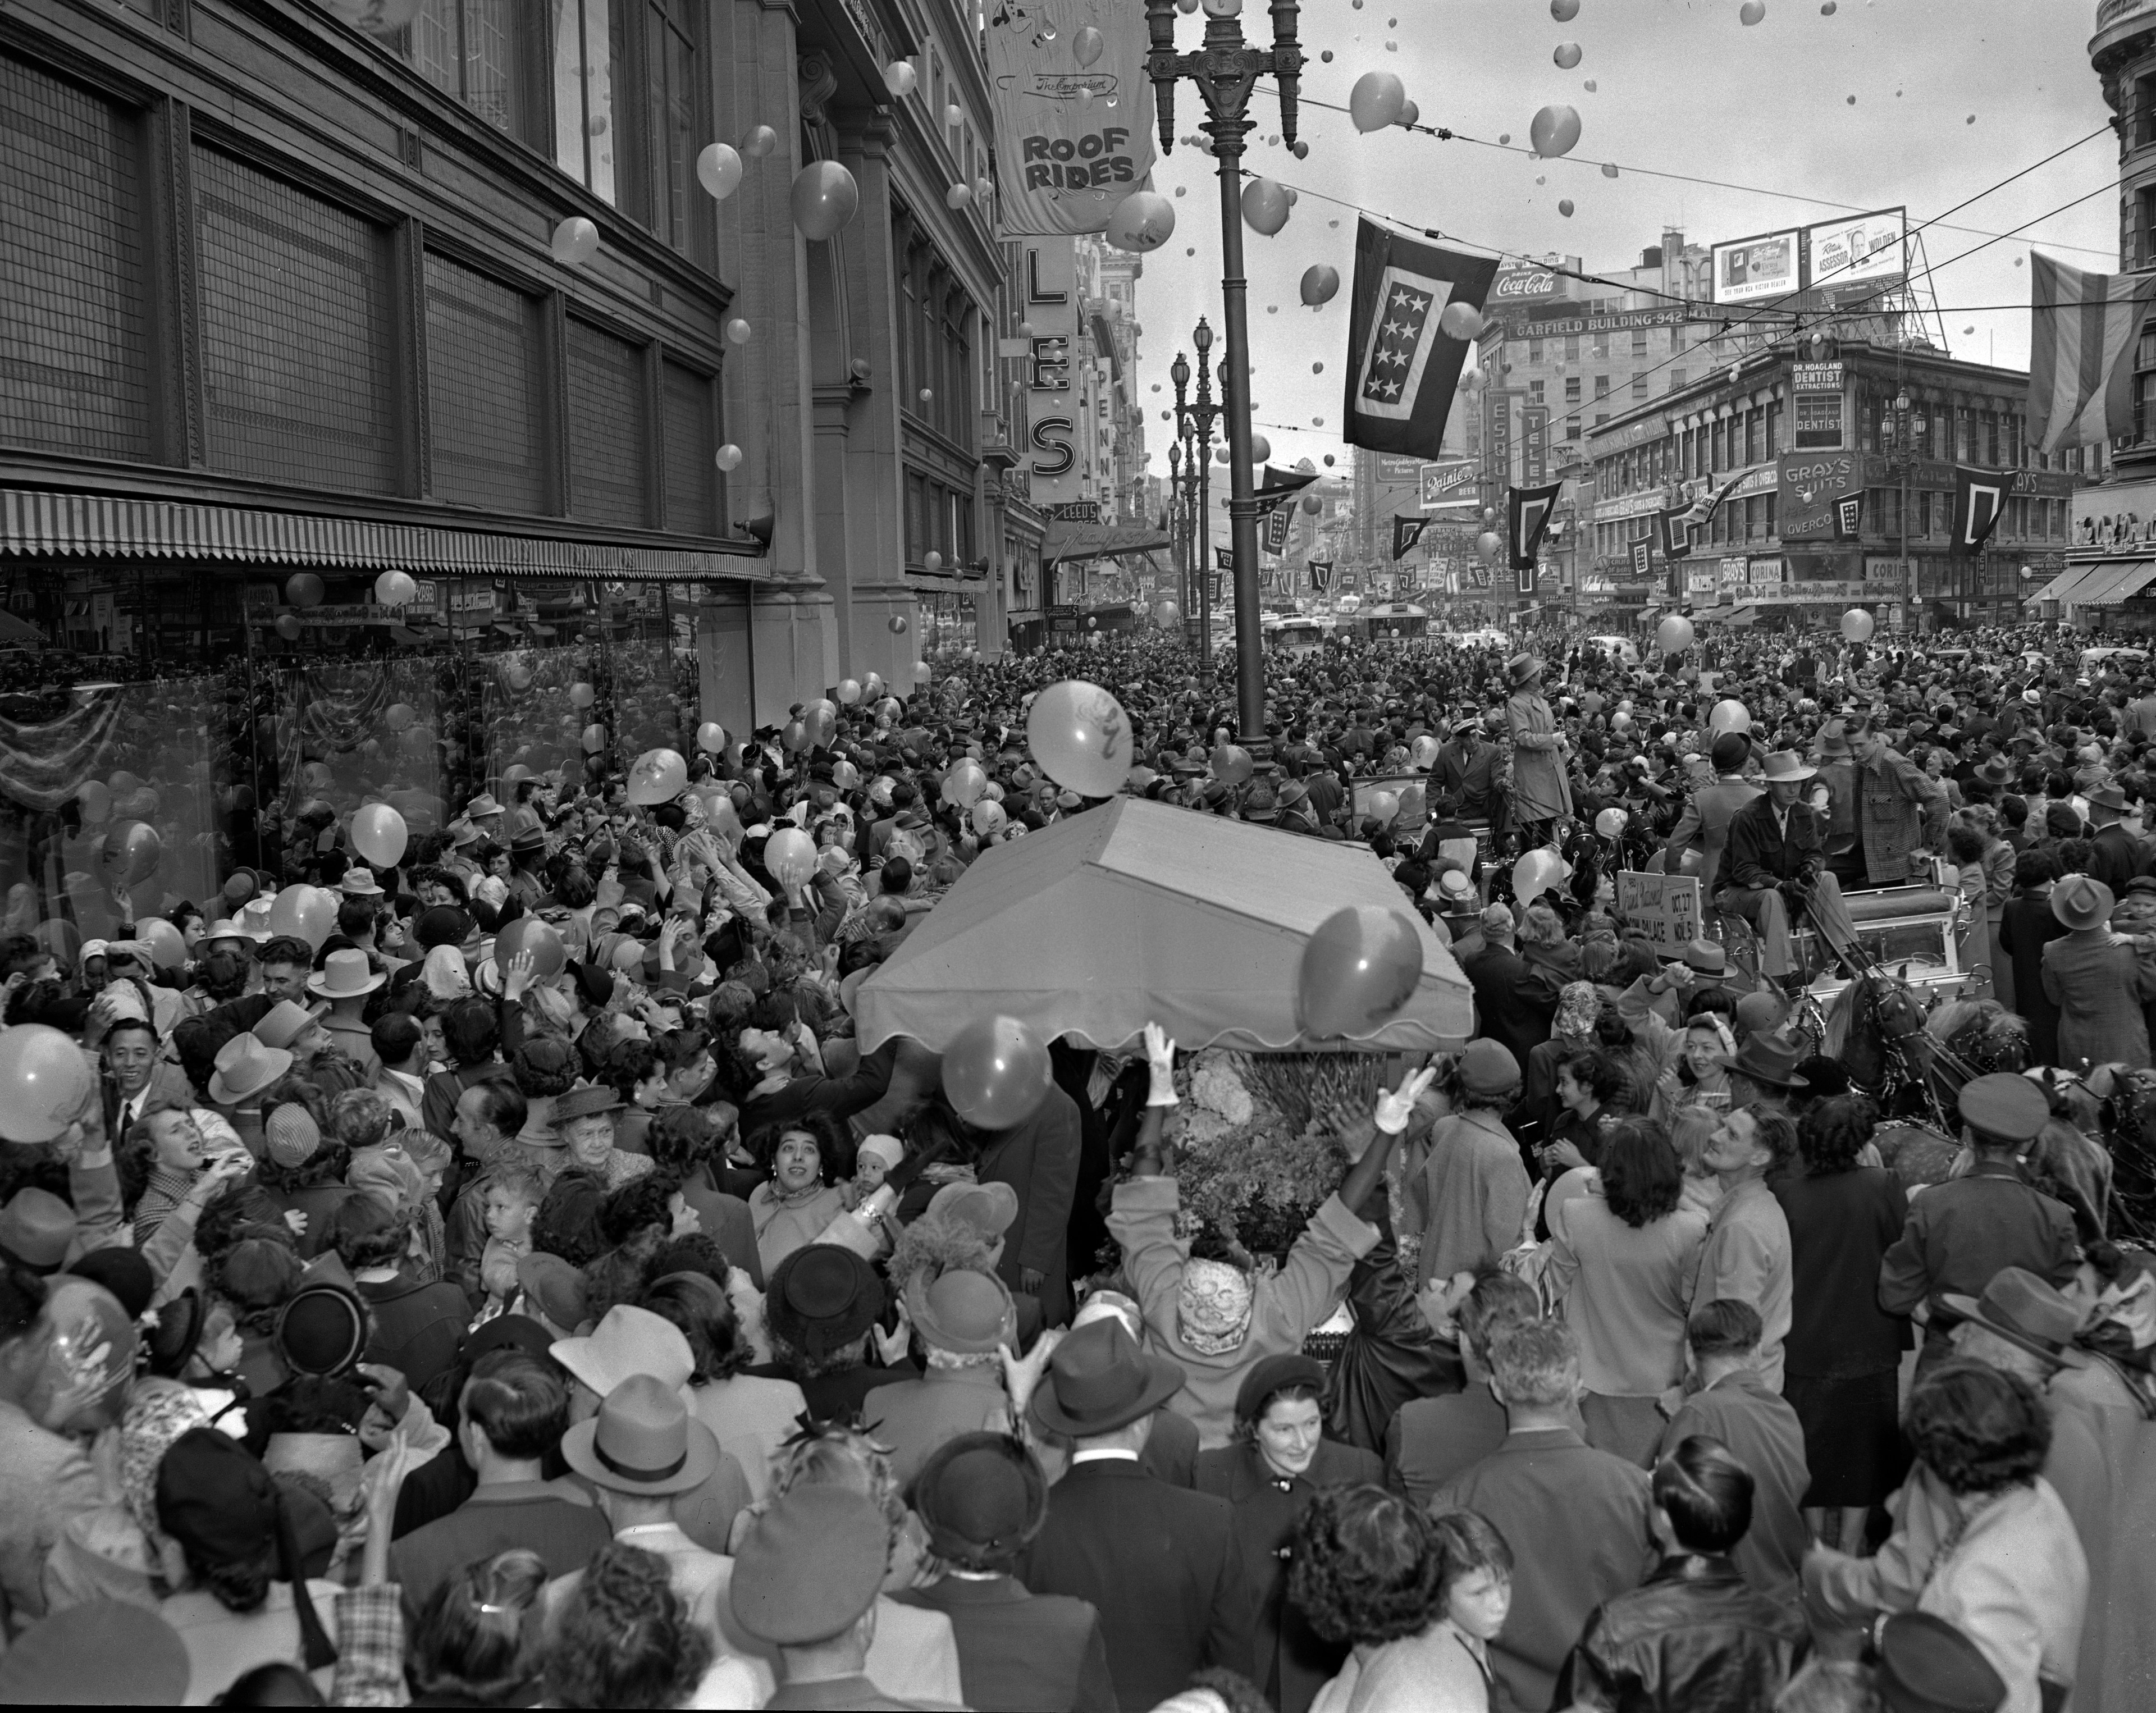 Santa Claus arrives by cable car at the Emporium in downtown San Francisco on Oct. 29, 1950.